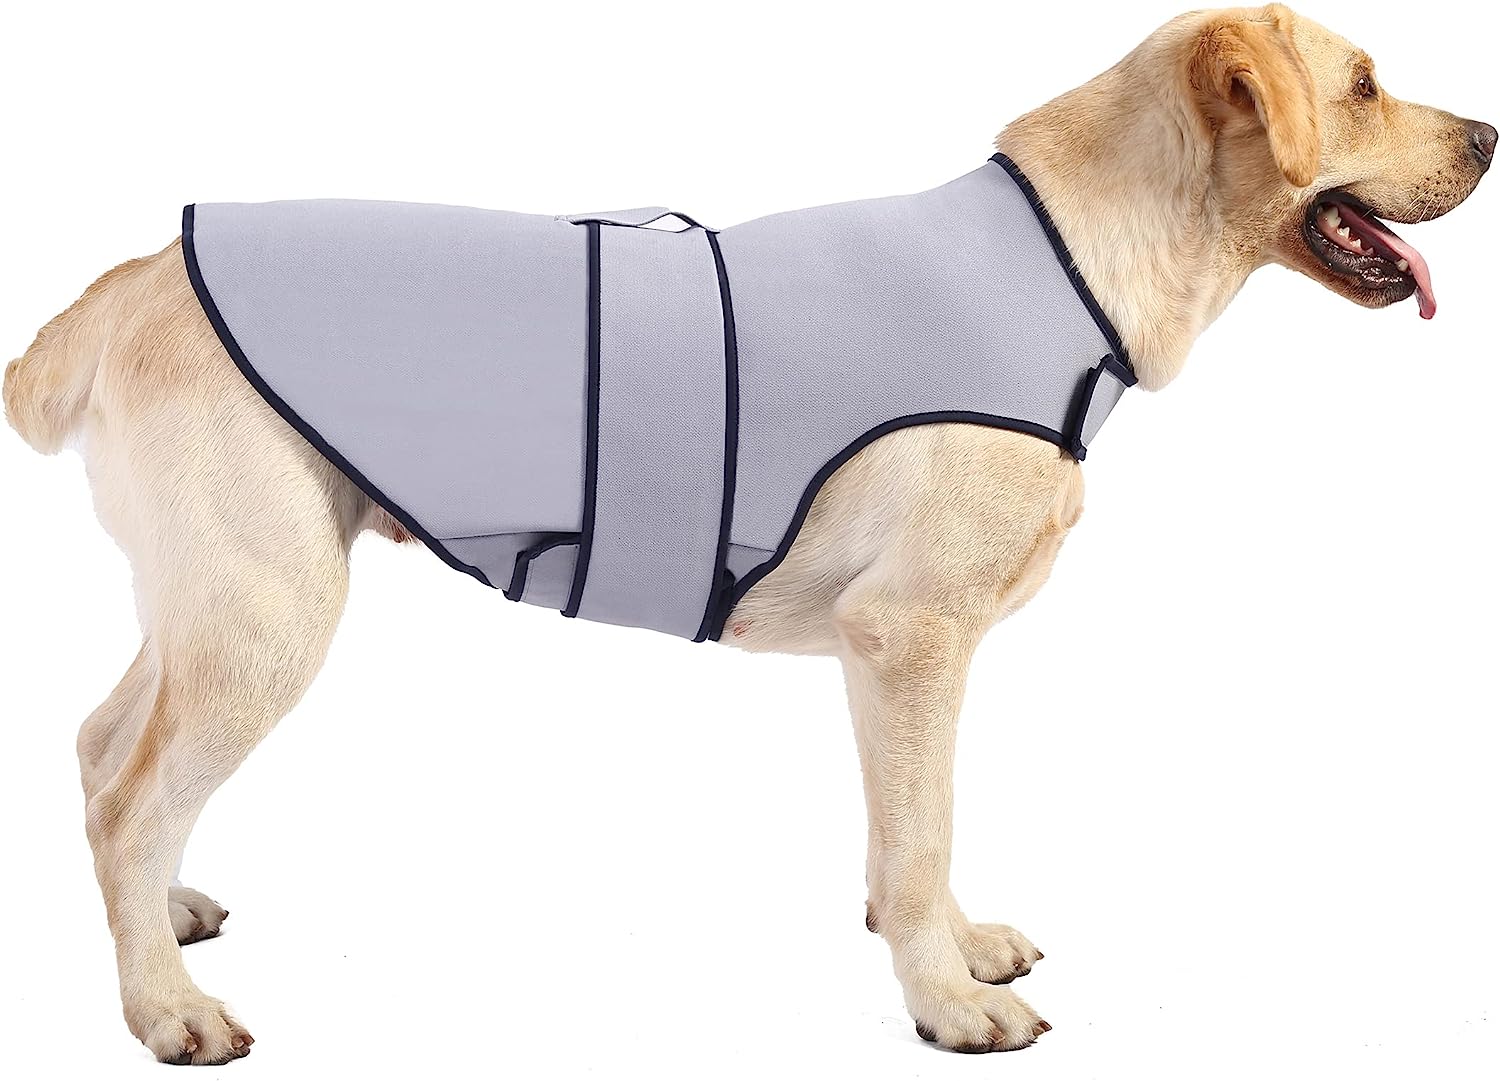 Sychien Dog Anxiety Dog Jacket, Thunder Calming Shirt Vest for Dogs